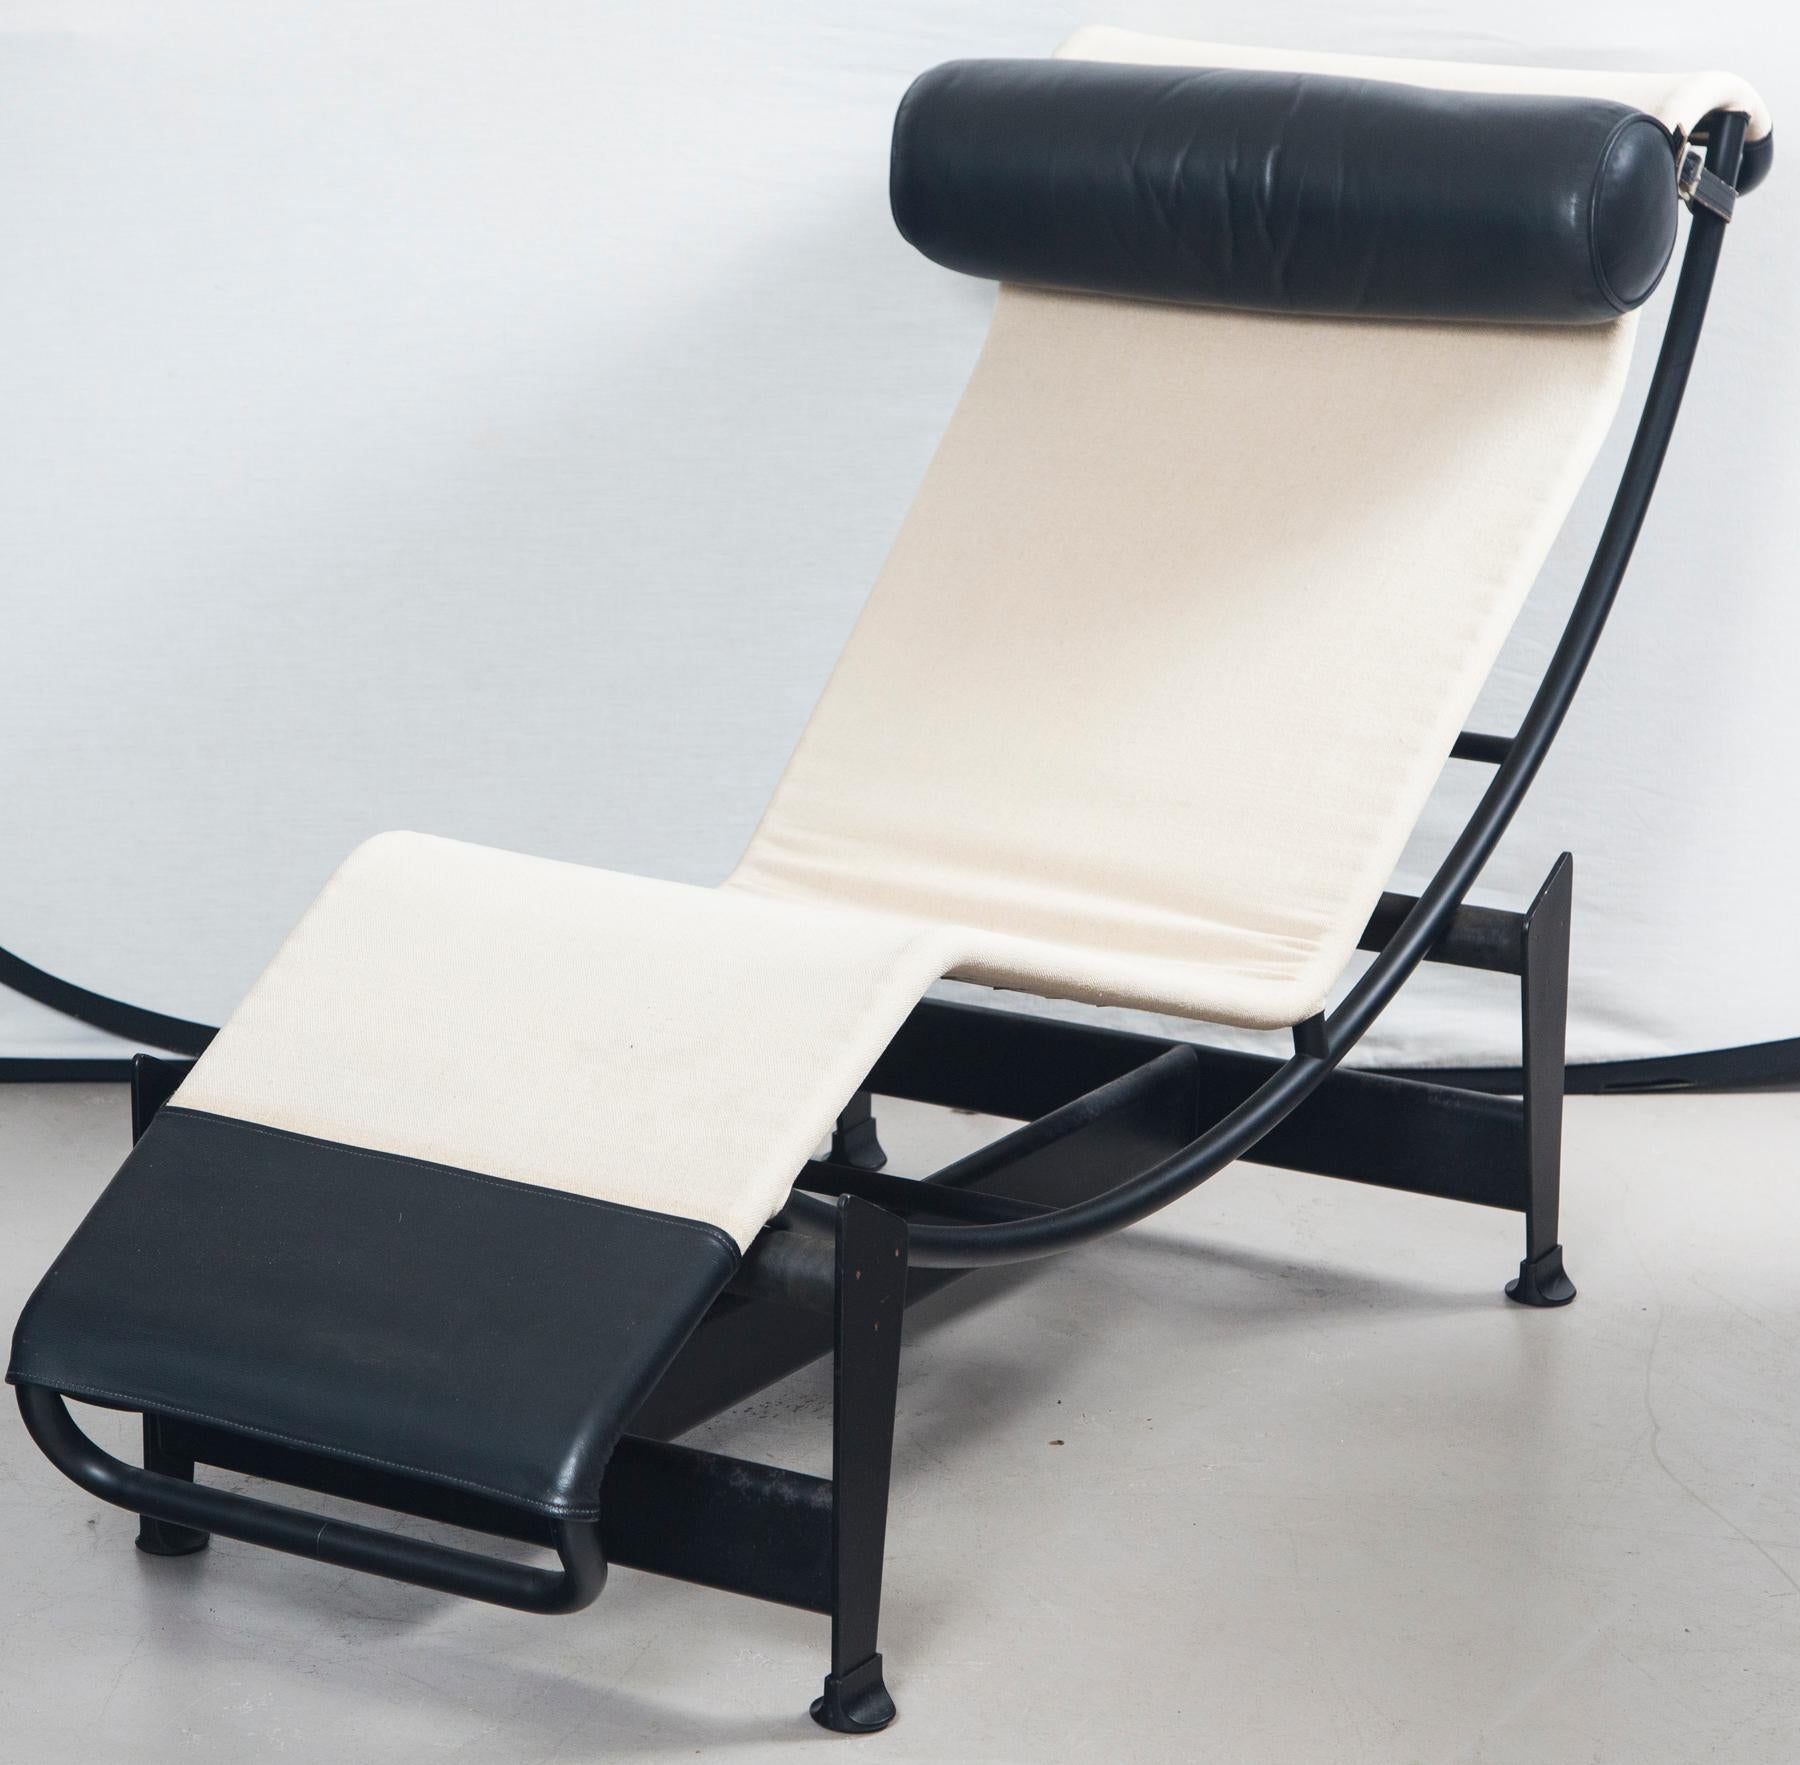 Modern Le Corbusier, Jeanneret and Charlotte Perriand LC4 Chaise Lounge